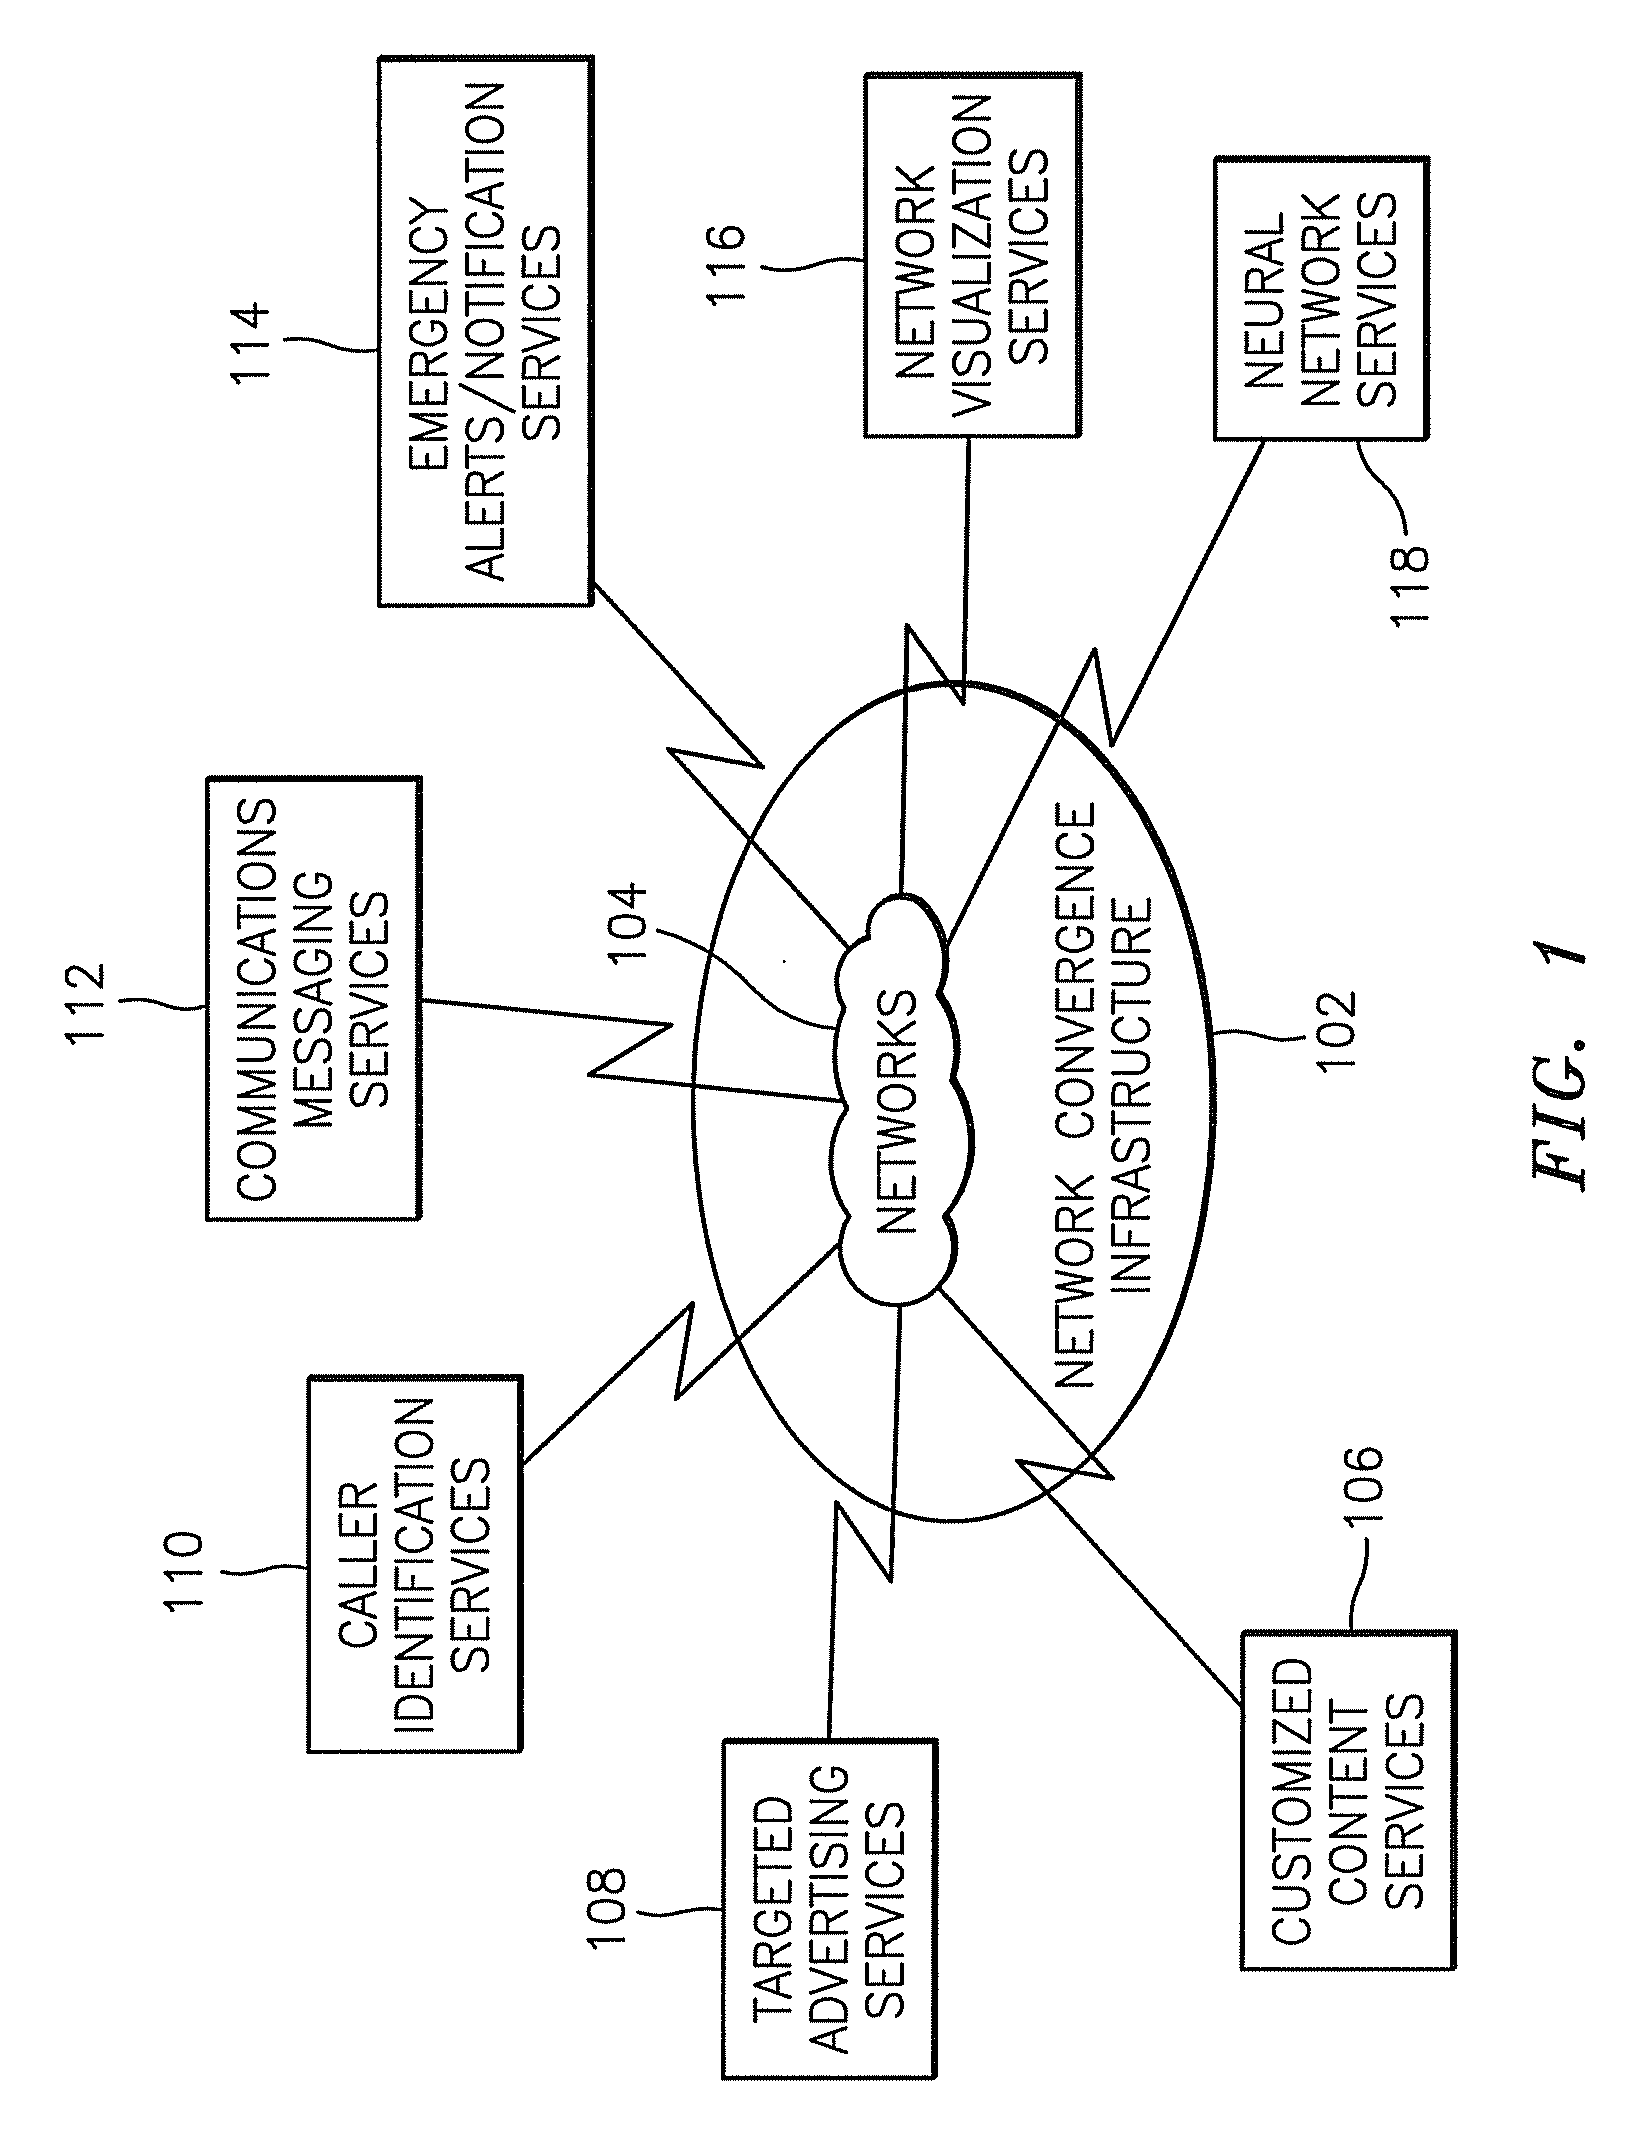 Methods, systems, and computer program products for providing targeted advertising to communications devices